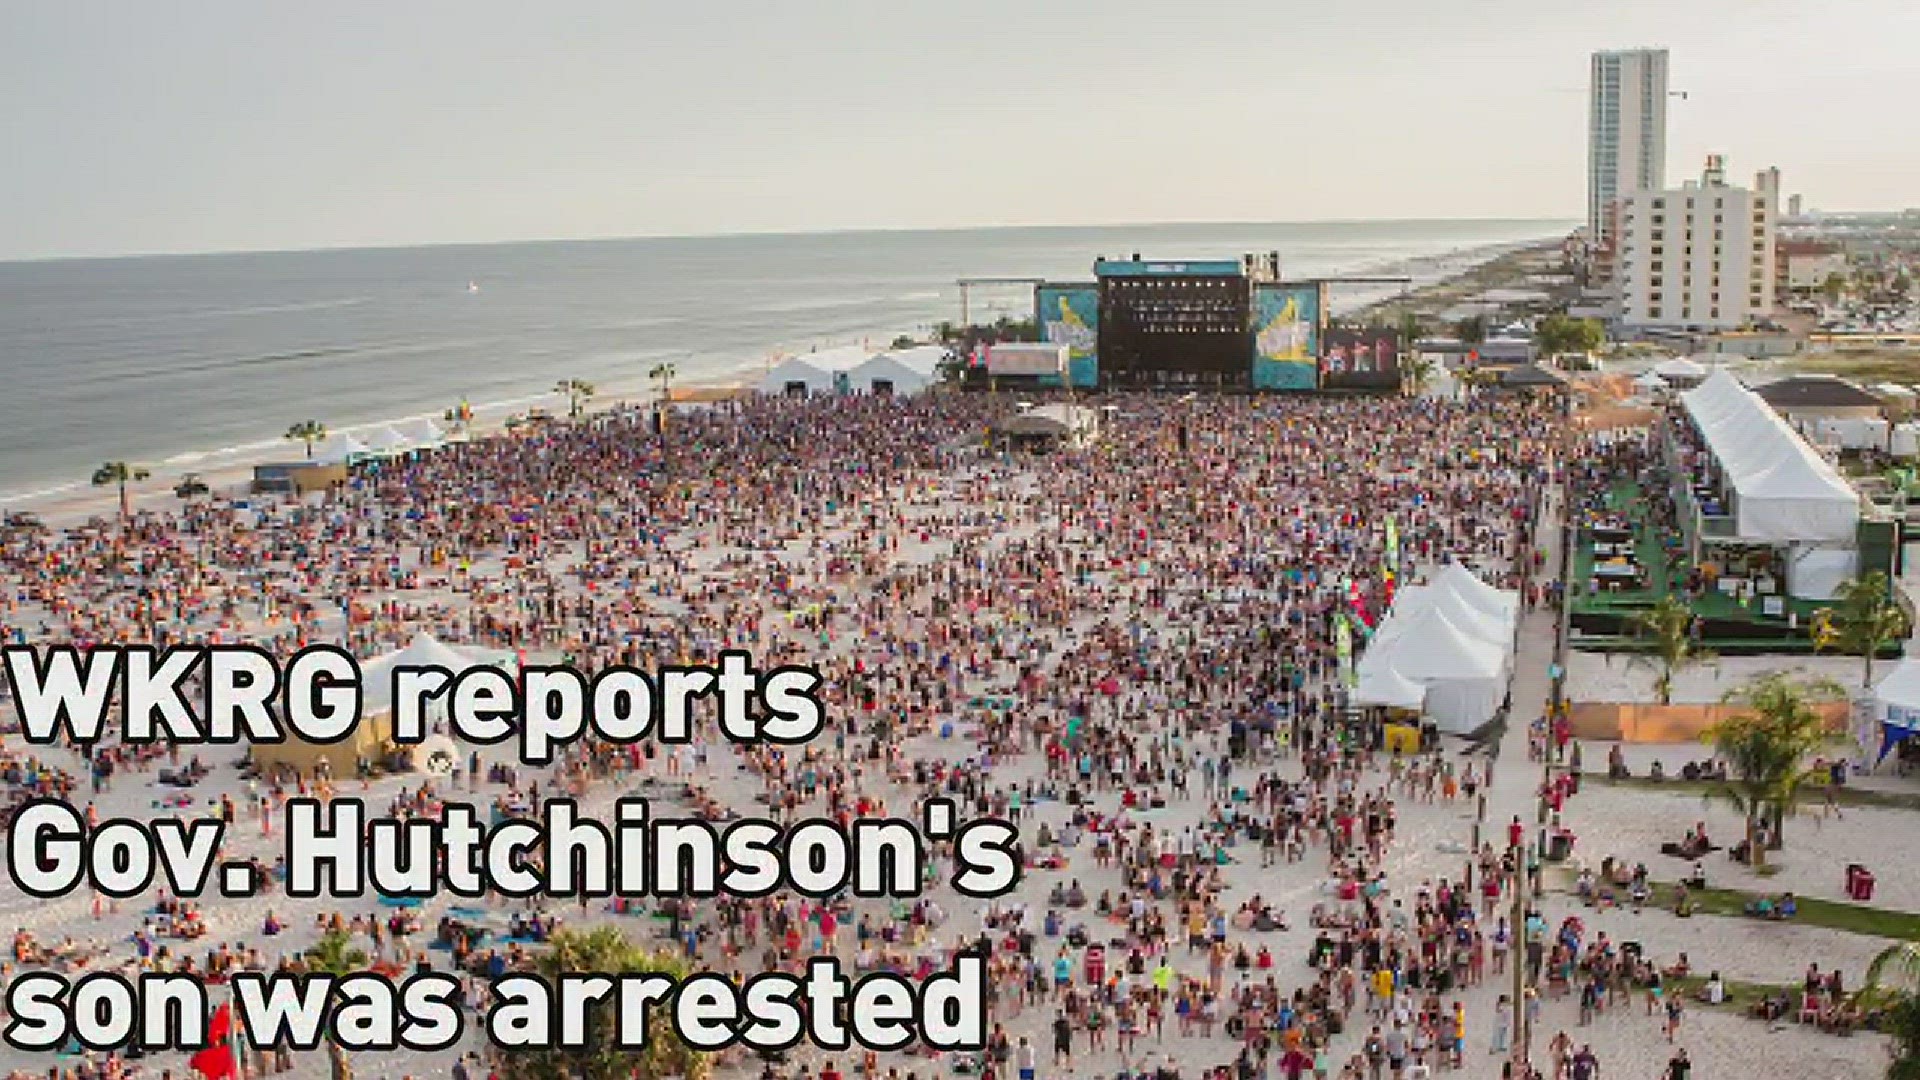 Gov. Hutchinson's son arrested at Hangout Music Festival (Photos: GETTY, Baldwin Co. Sheriff's Office)